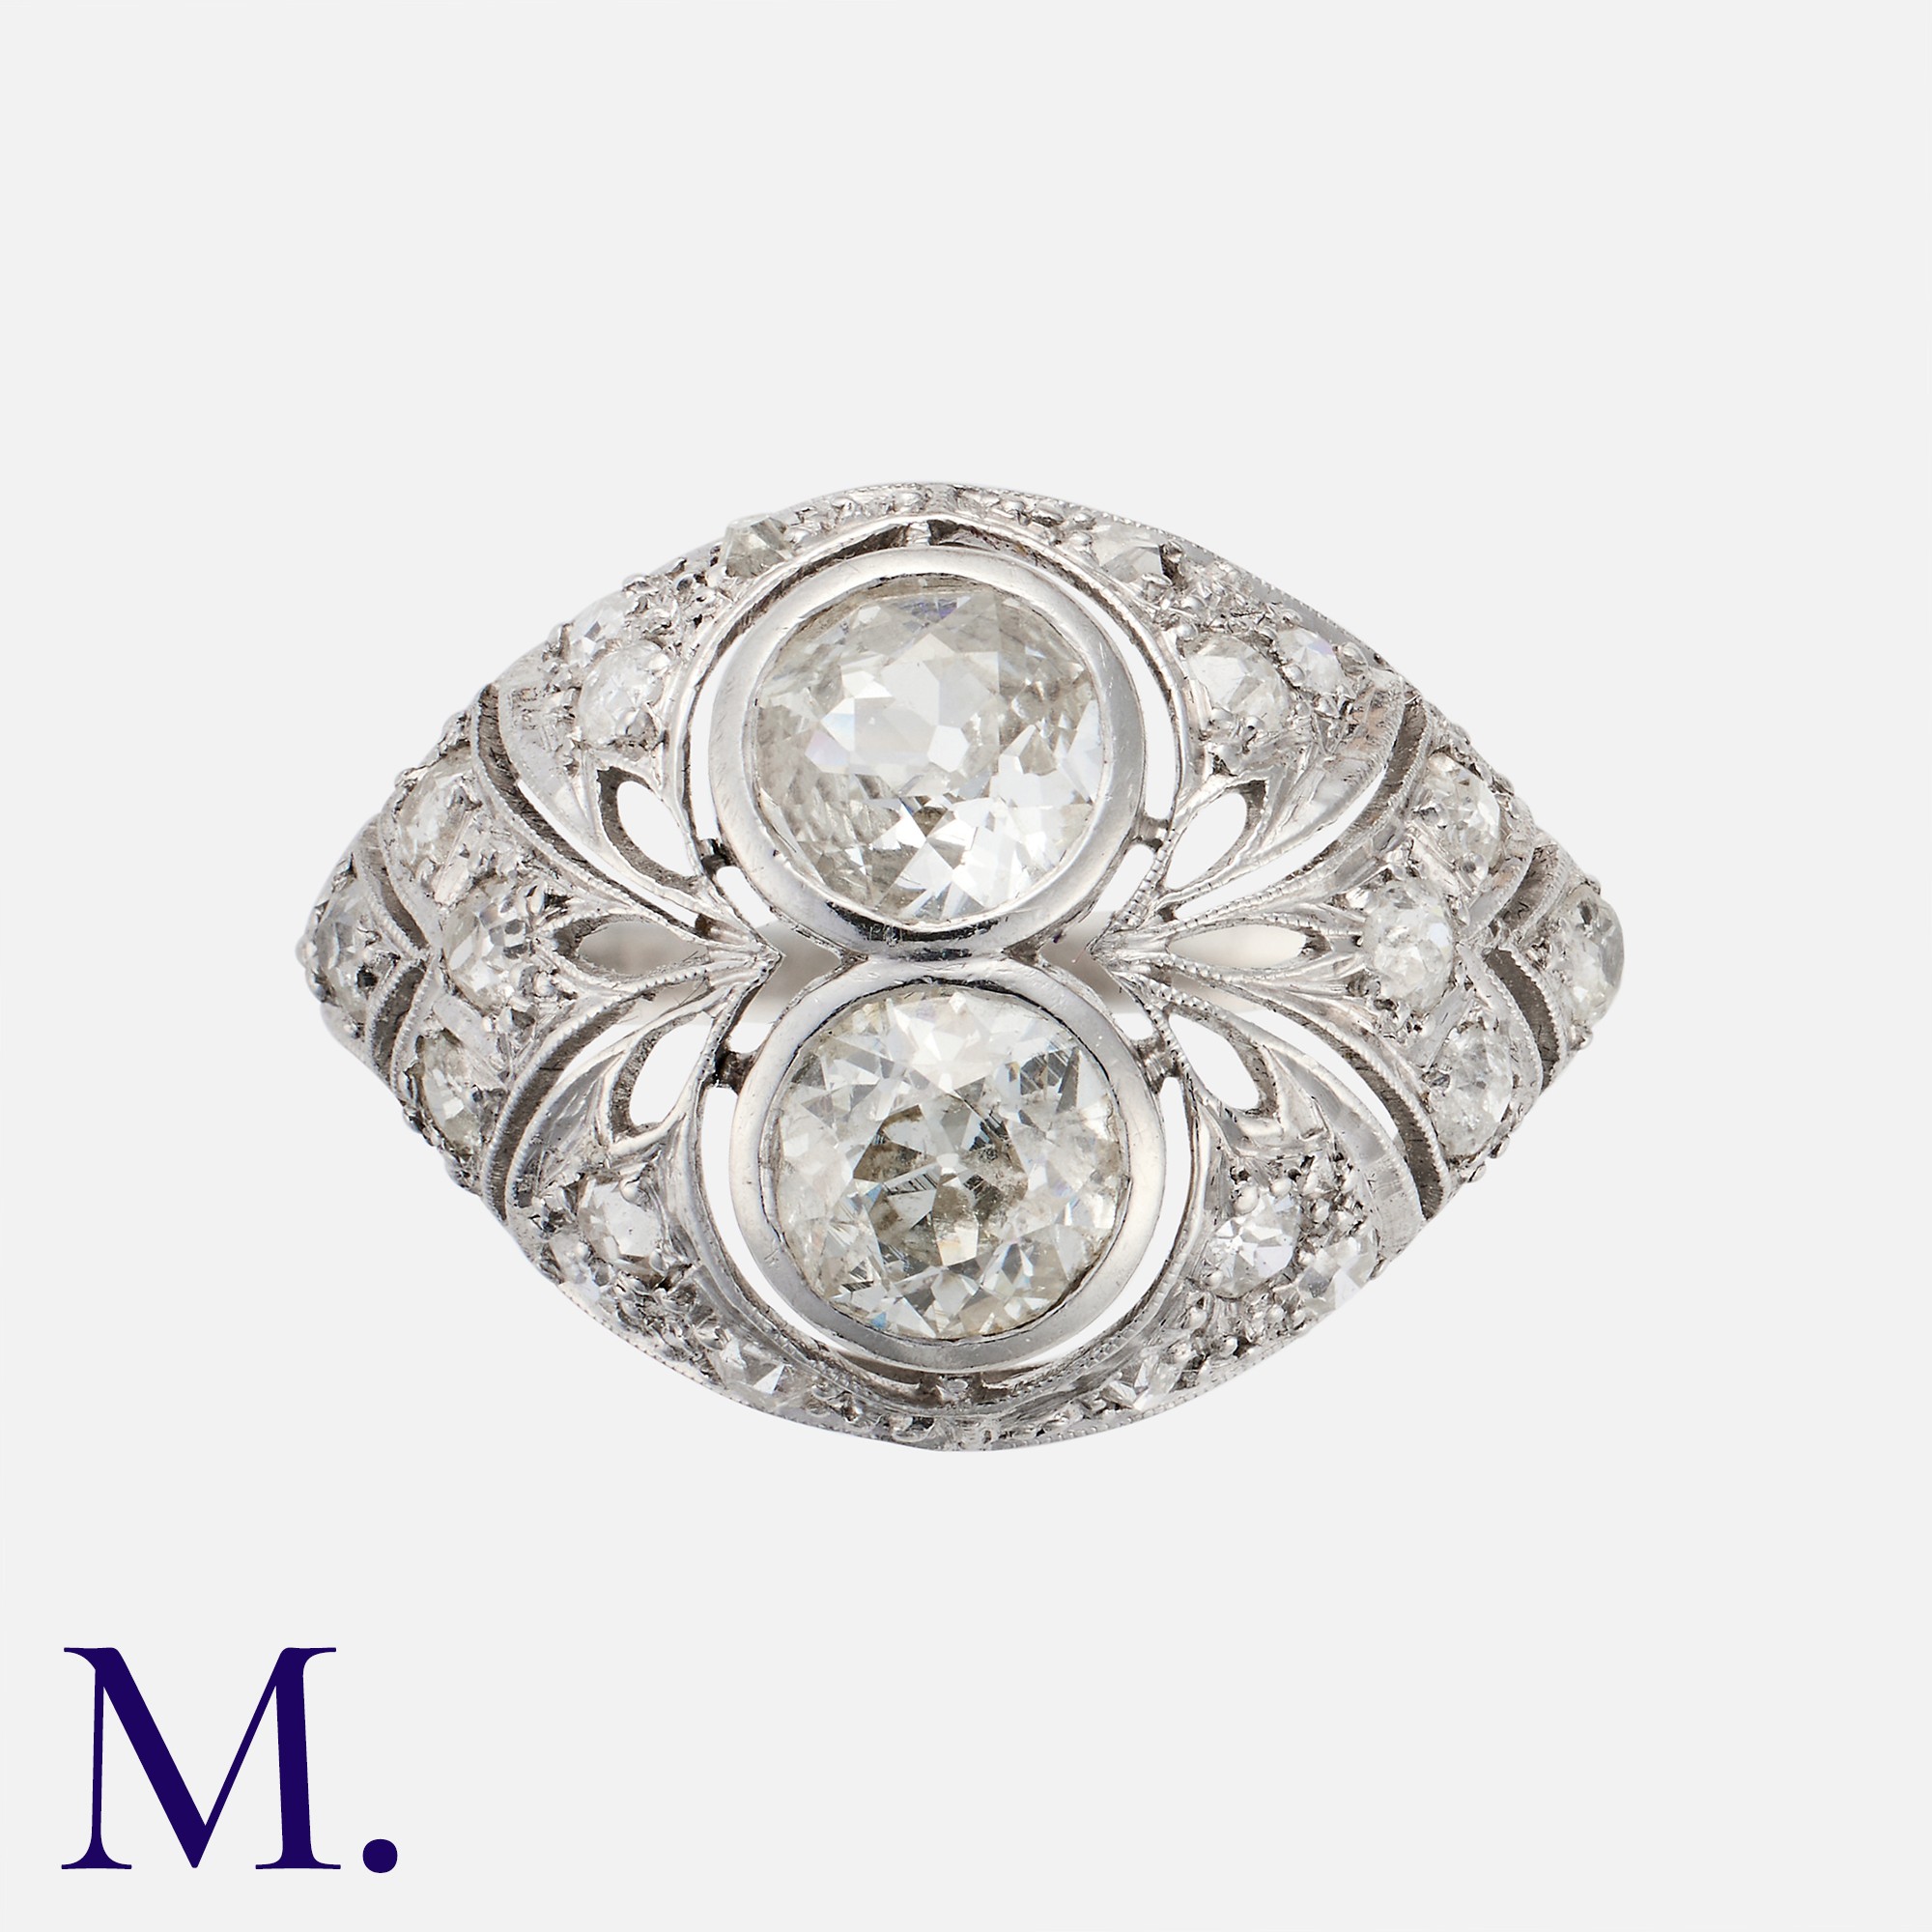 An Art Deco French Diamond Bombe Ring in platinum set with two old cut diamonds of approximately 0.